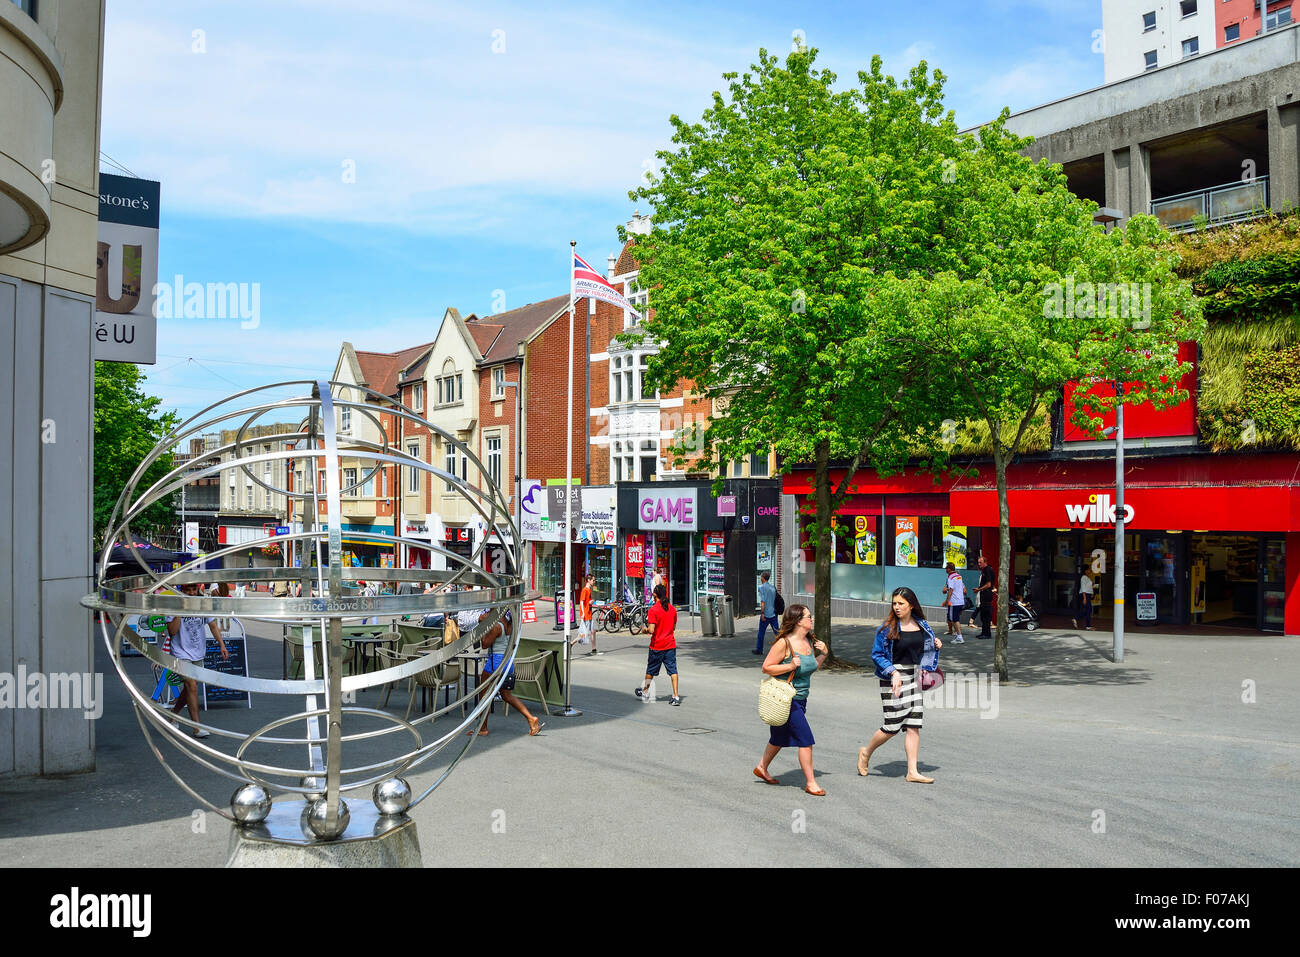 Rotary sculpture and High Street, Sutton, London Borough of Sutton, Greater London, England, United Kingdom Stock Photo